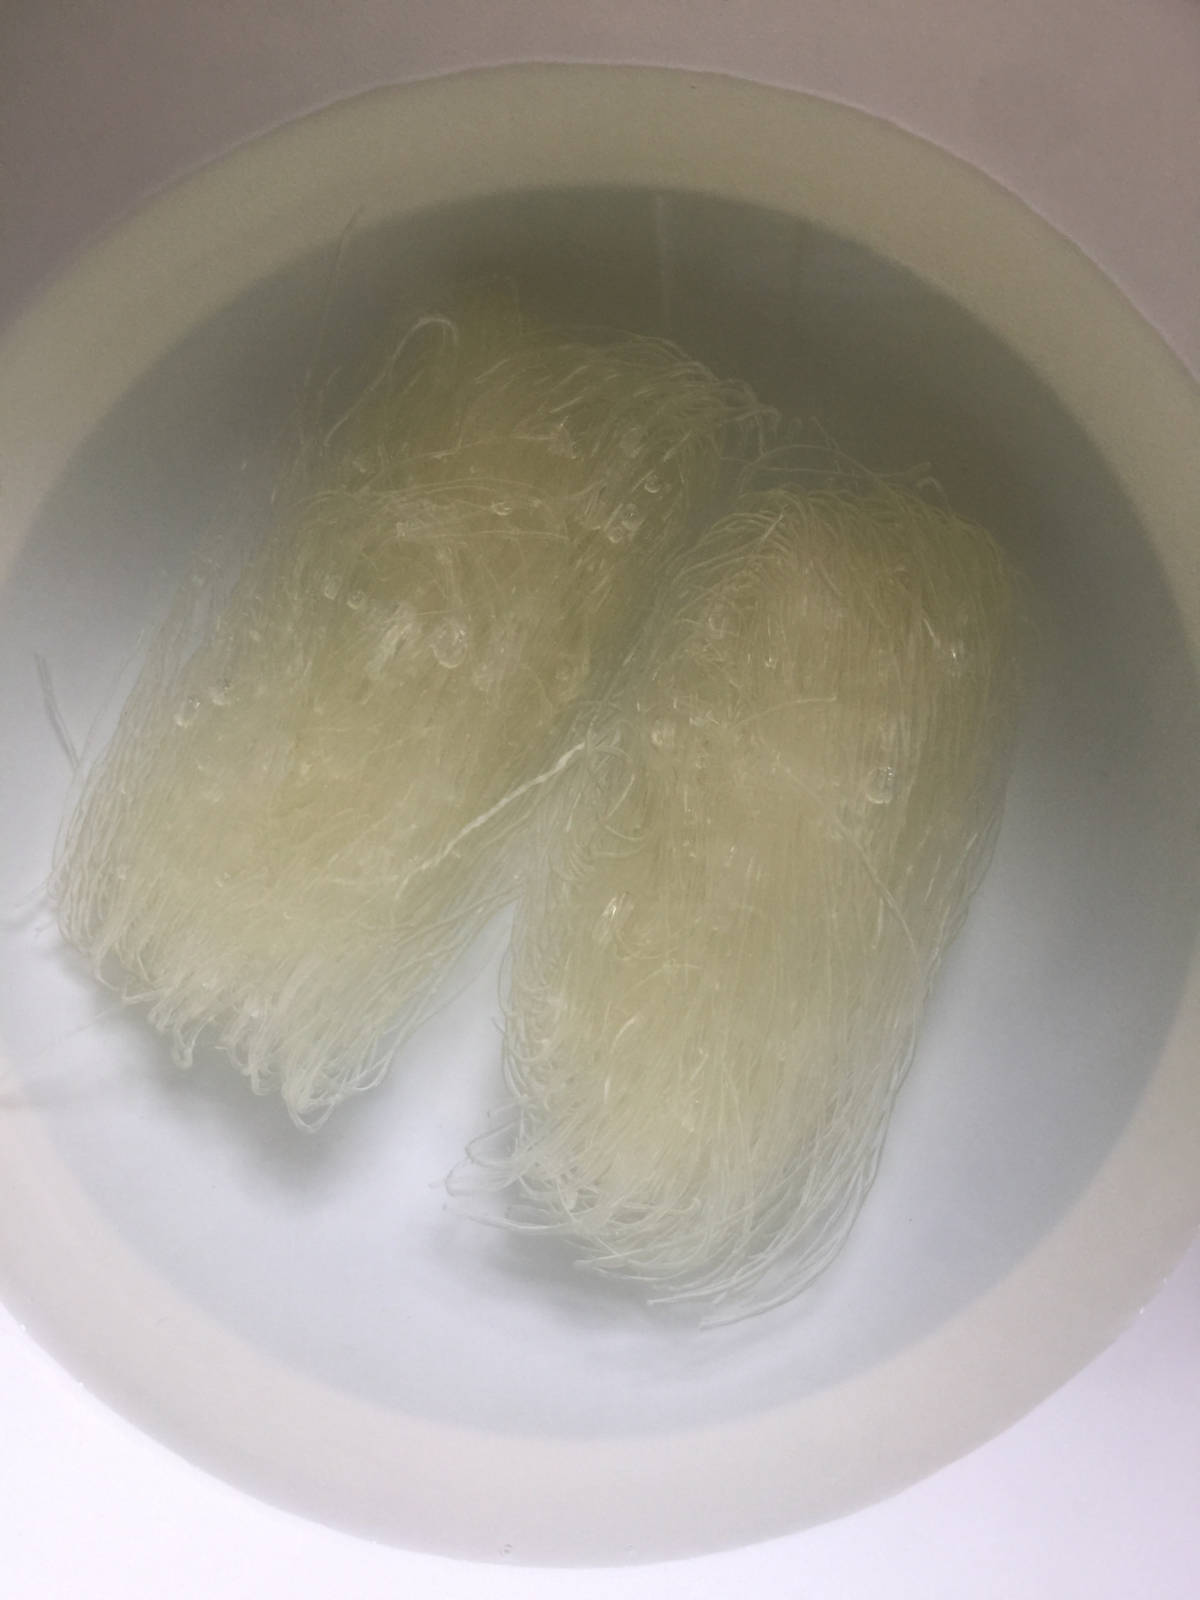 2 small bunches of vermicelli noodle soaked in water in a white container